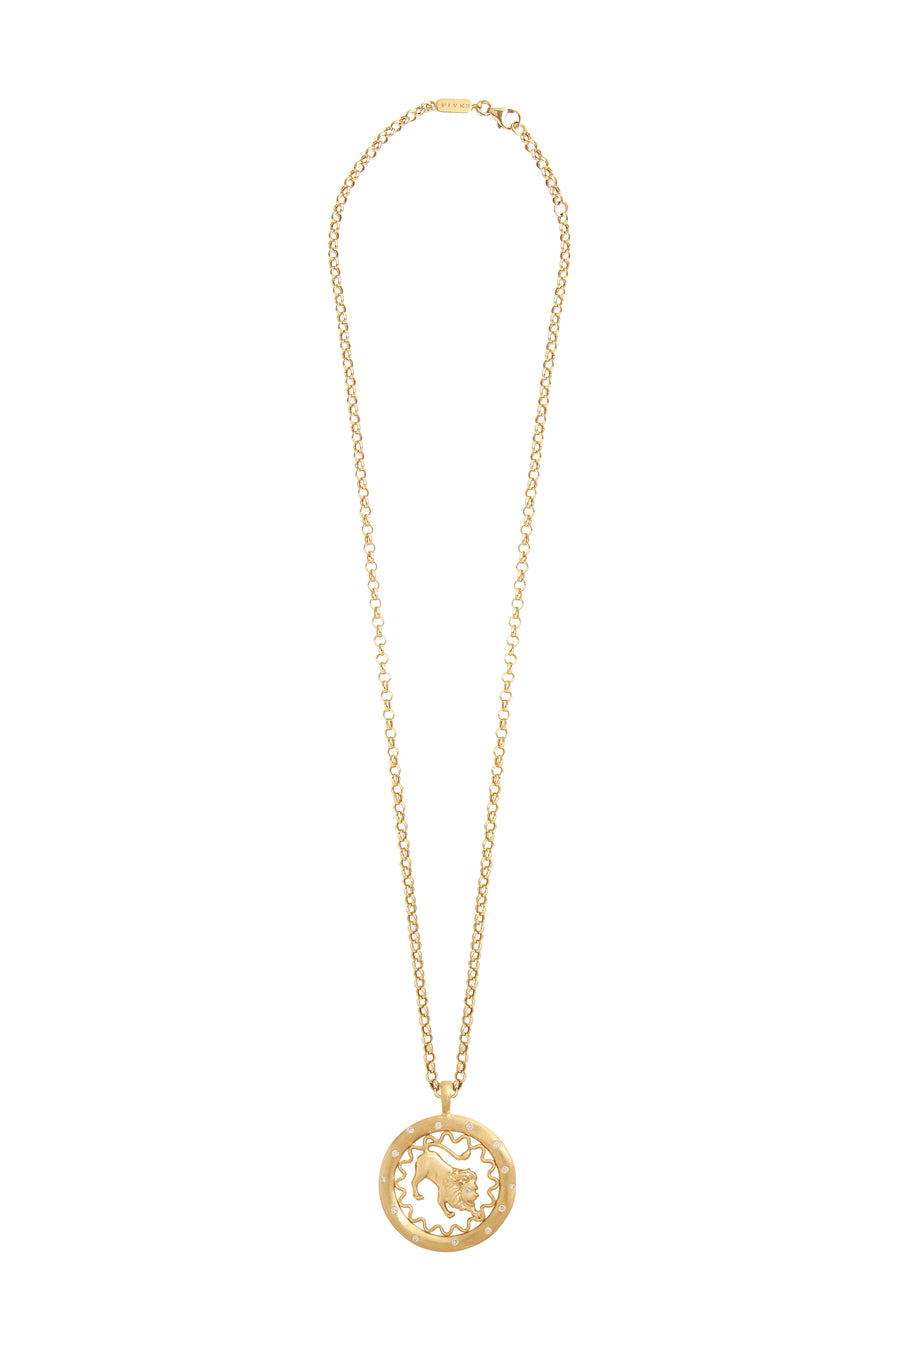 The Leo Necklace